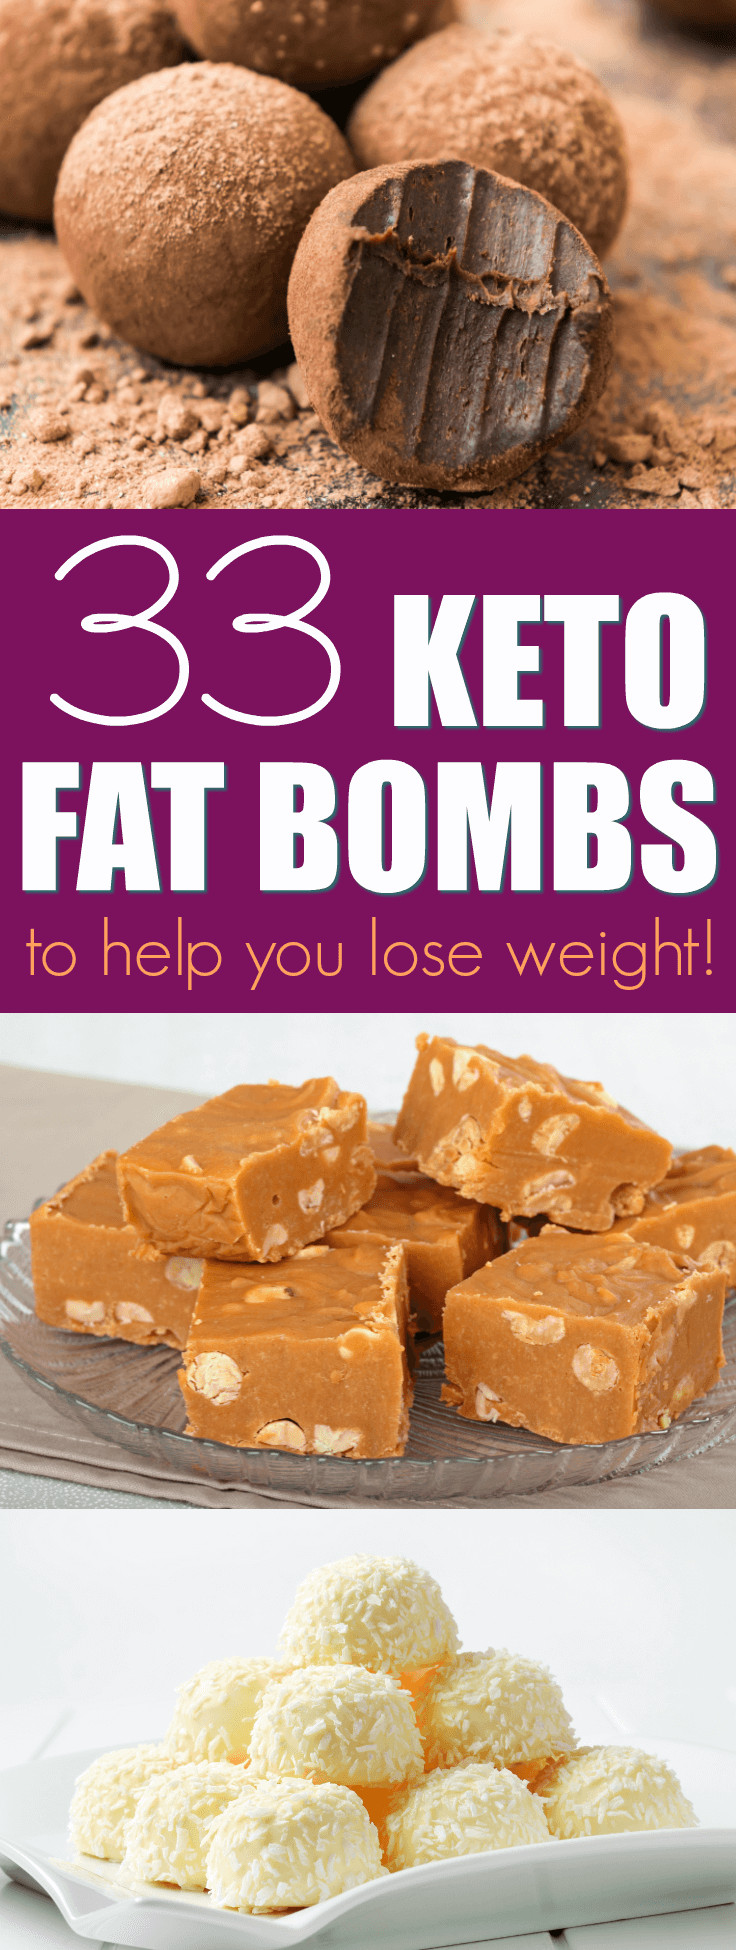 Low Carb Keto Fat Boms
 33 Must Try Fat Bombs for Keto or Low Carb Diets